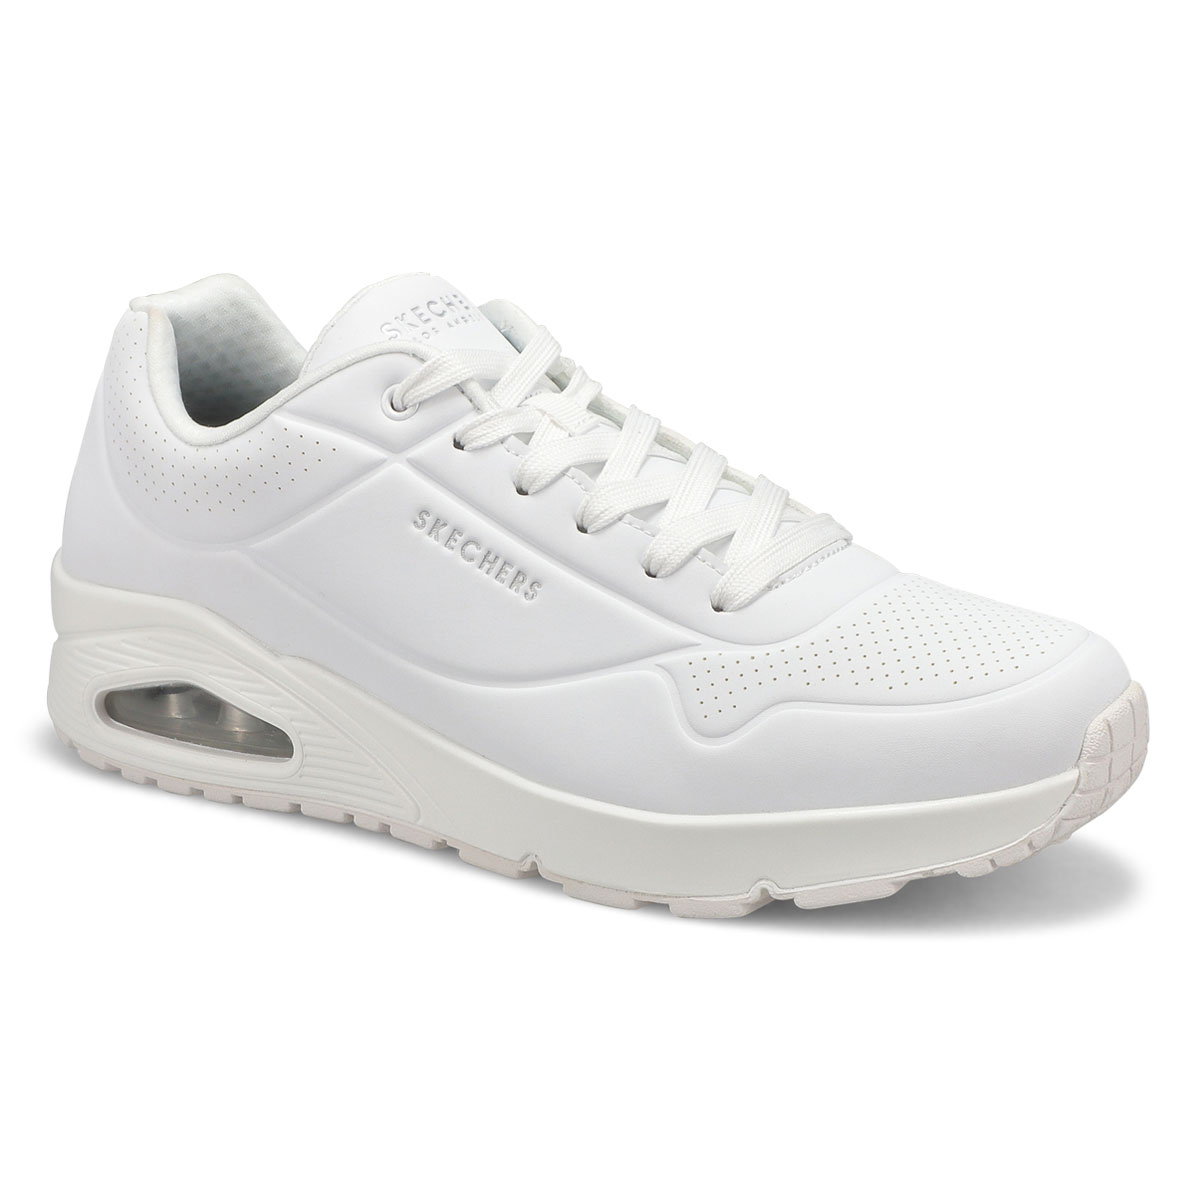 Skechers Men's Uno Stand On Air Sneaker -Whit